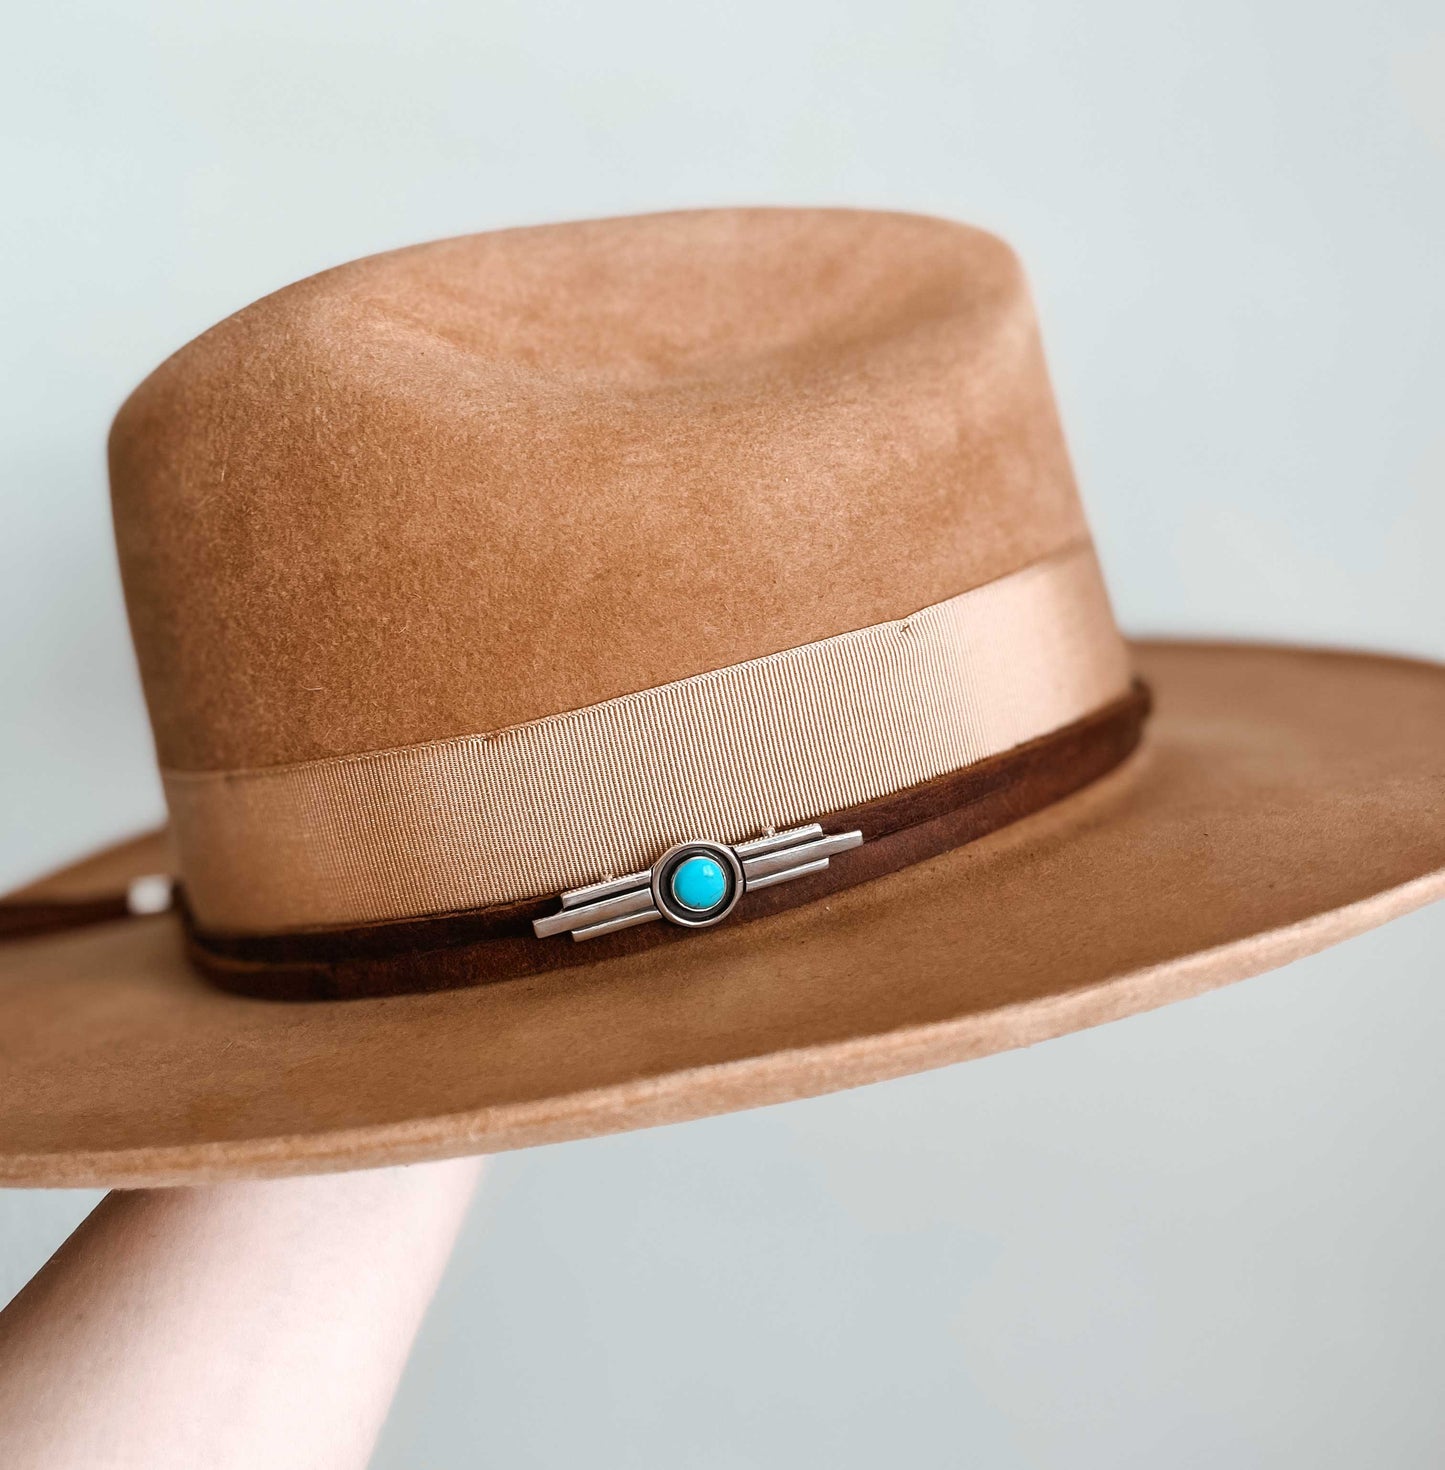 Art deco inspired sterling silver turquoise hat pin on brown leather hat band wrapped around tan hat with cream colored ribbon band. 